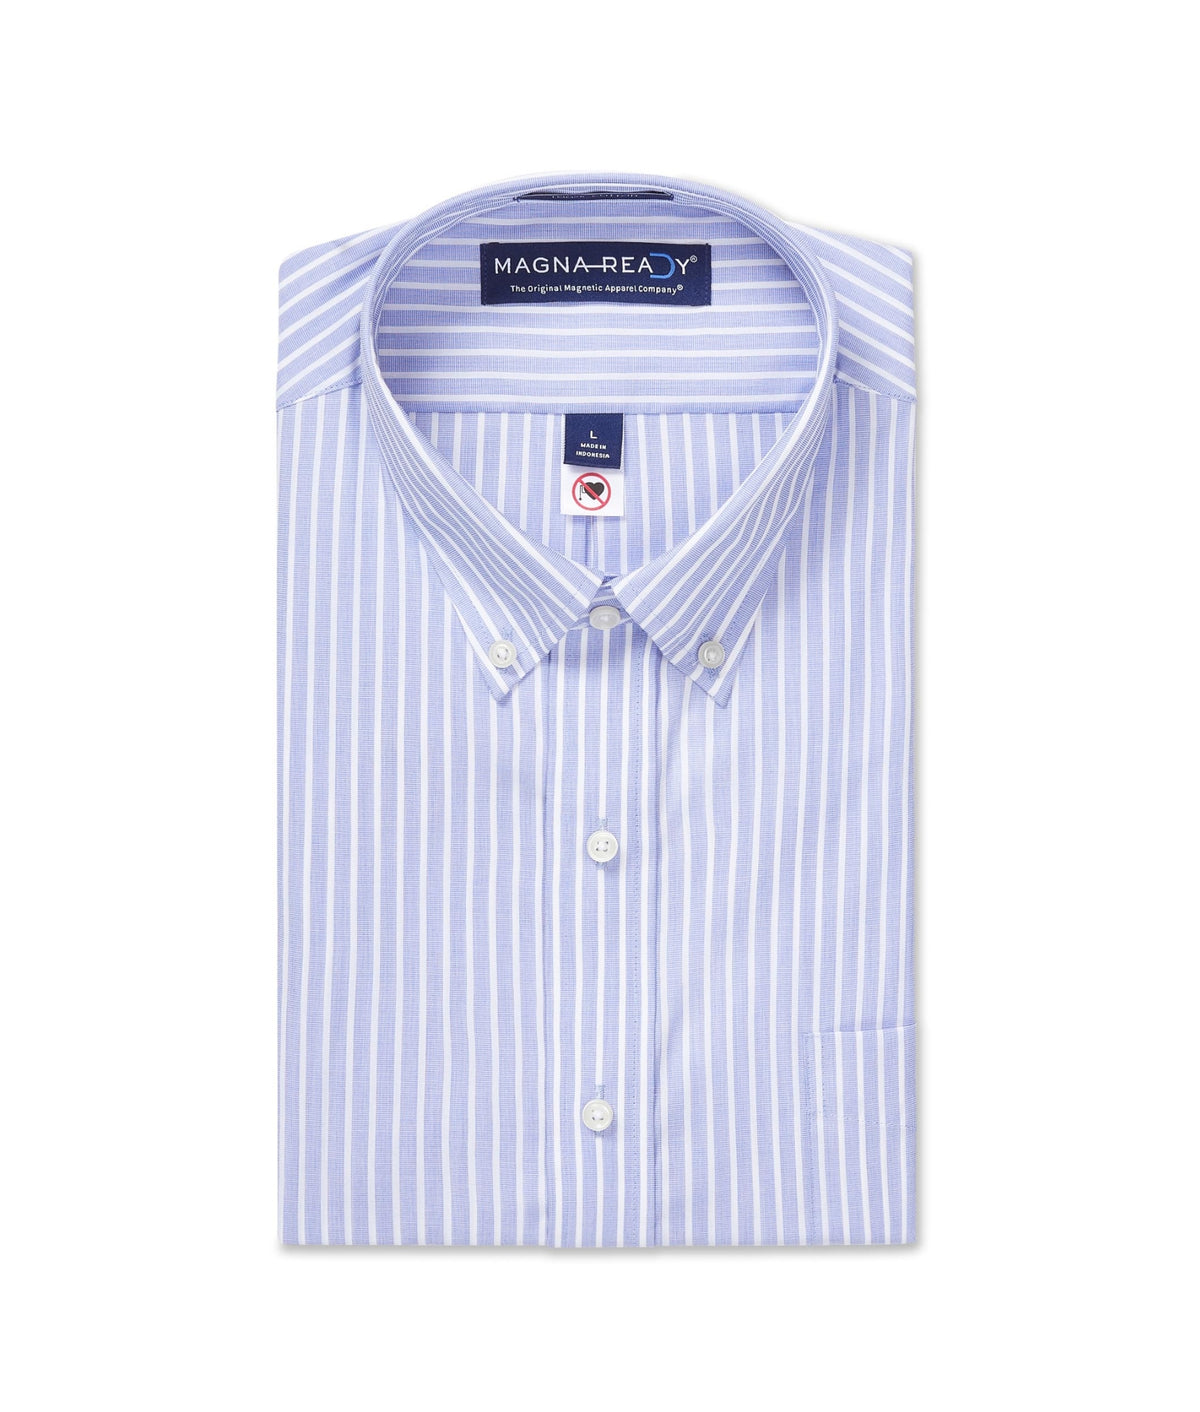 Long Sleeve Blue Button Down Collar Stripe Classic Plaid Shirt with Magnetic Closures